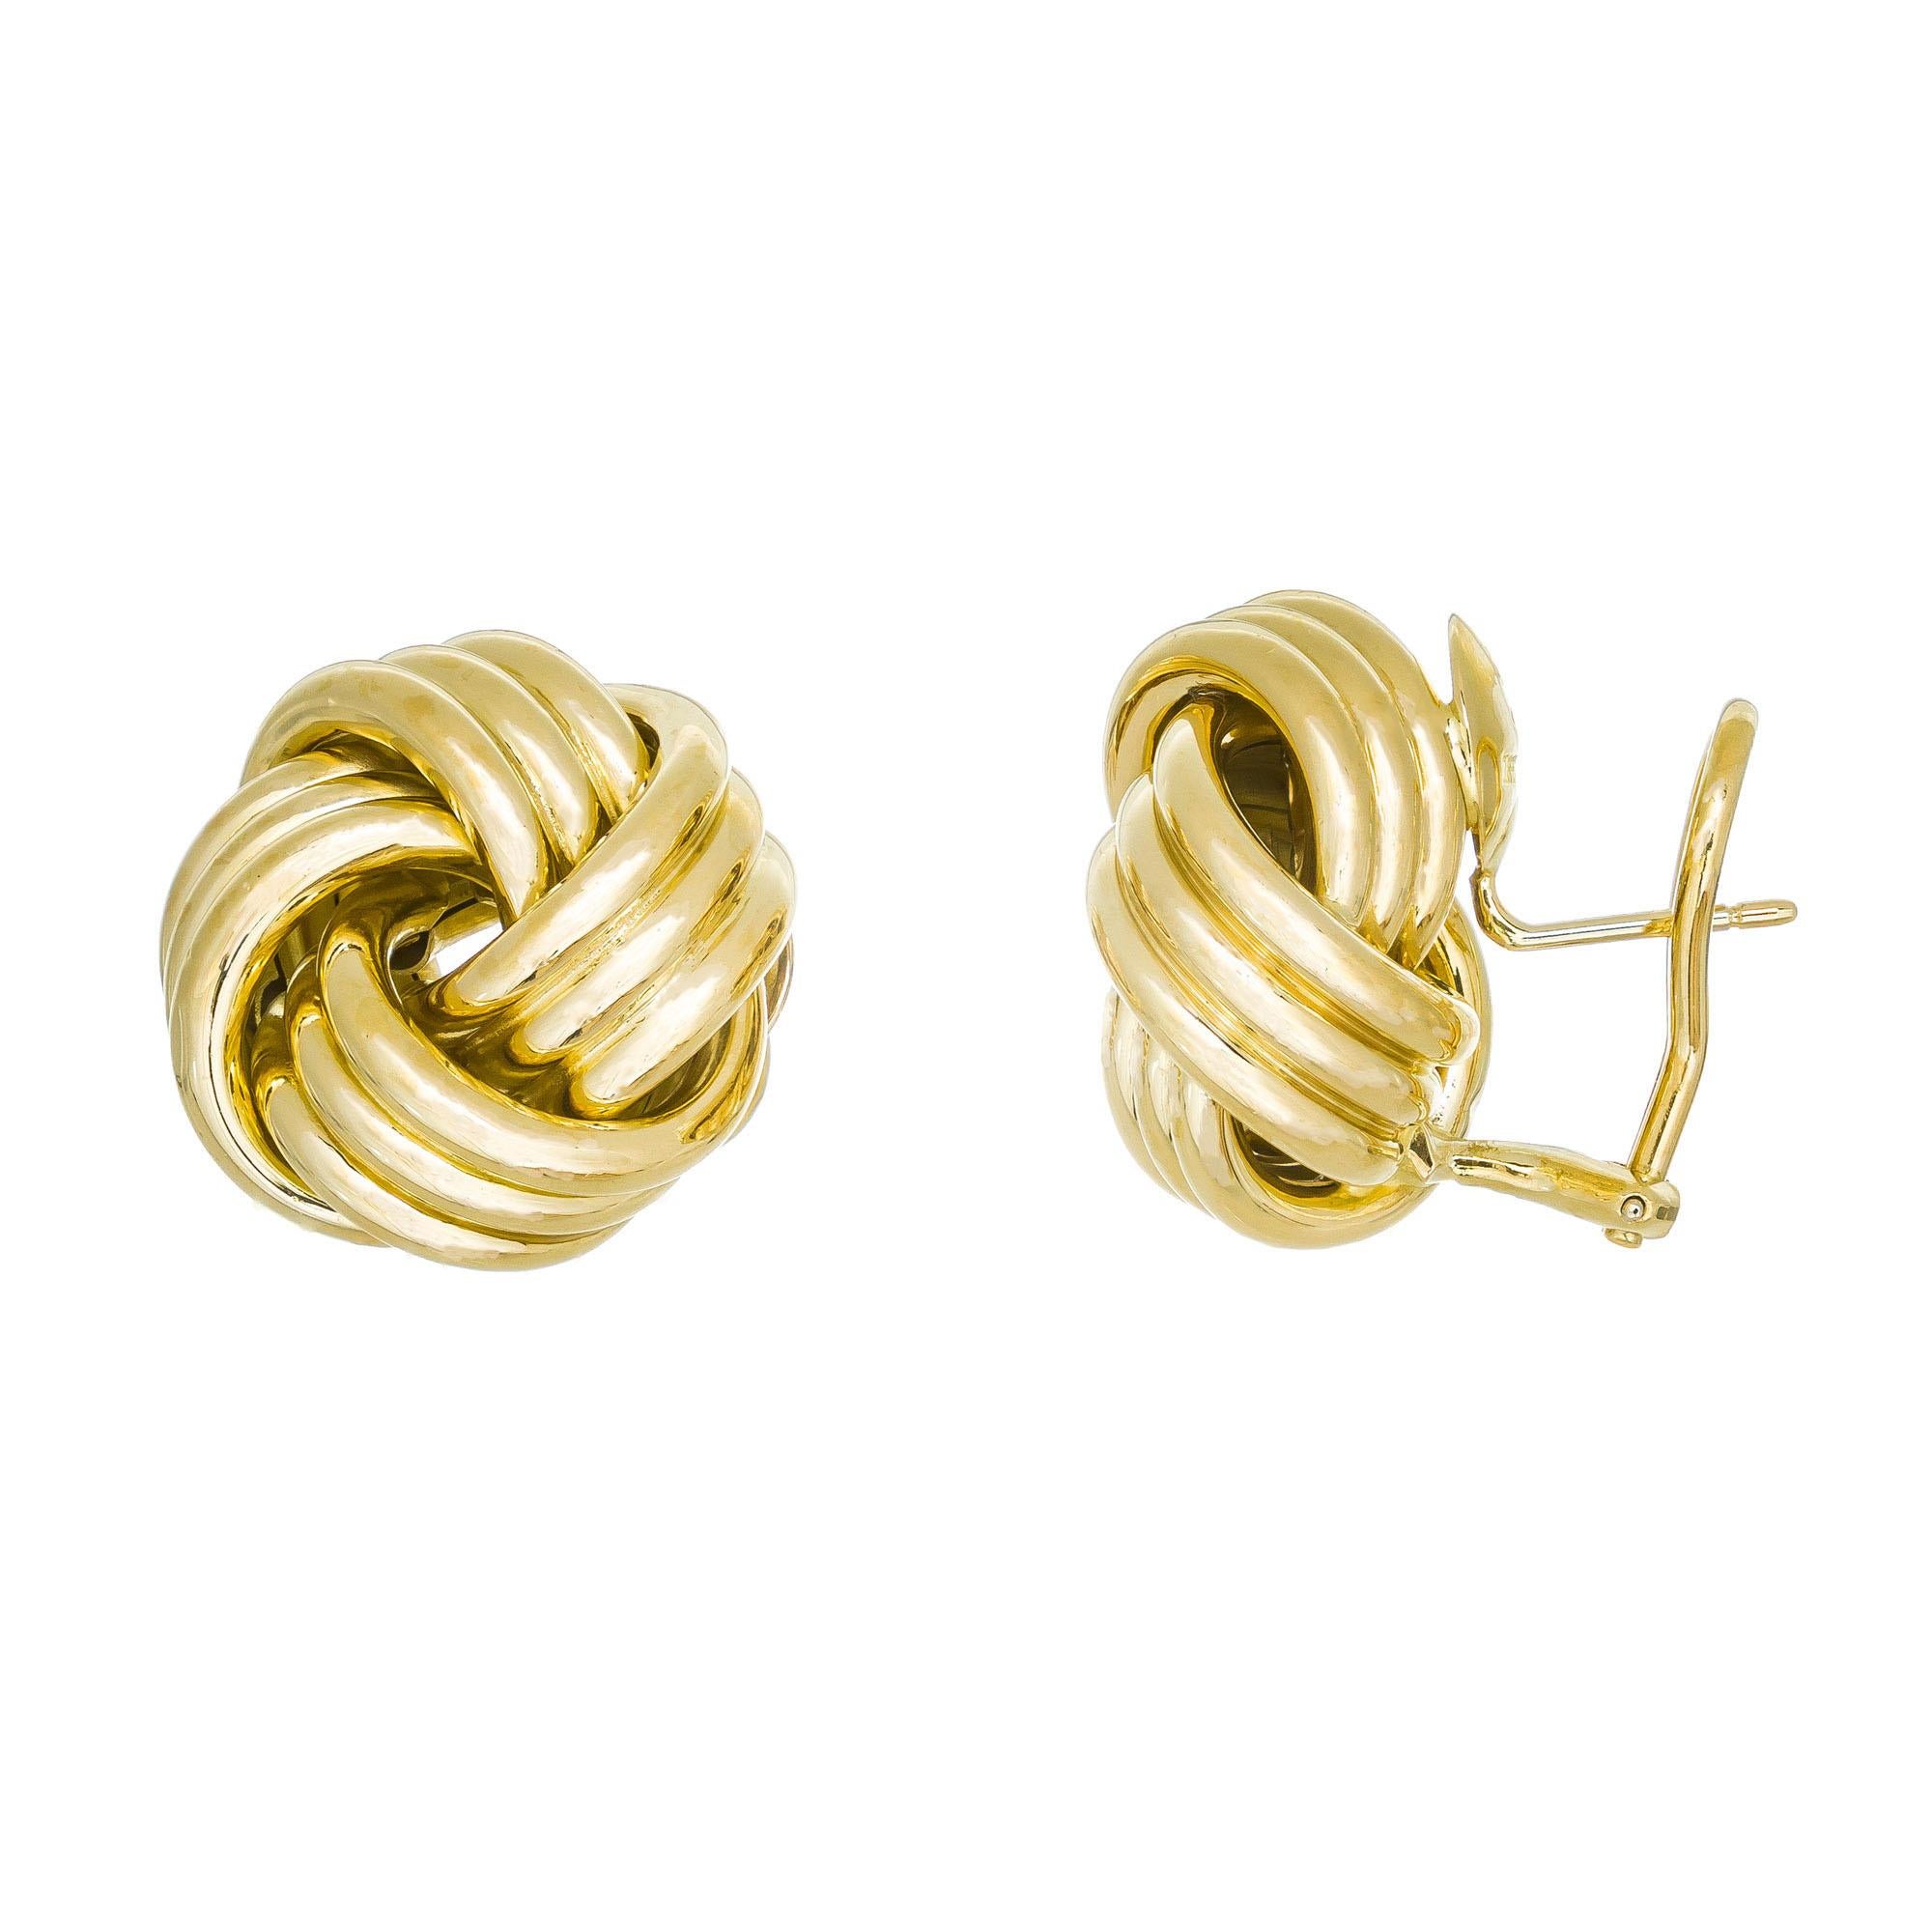 Tiffany & Co 3-dimensional love knot earrings in 18k yellow gold with posts and omega clips 

18k yellow gold 
Stamped: 750
Hallmark: Tiffany & Co
14.5 grams
Top to bottom: 20.3mm or 13/16 Inches
Width: 20.4mm or 13/16 Inches
Depth or thickness: